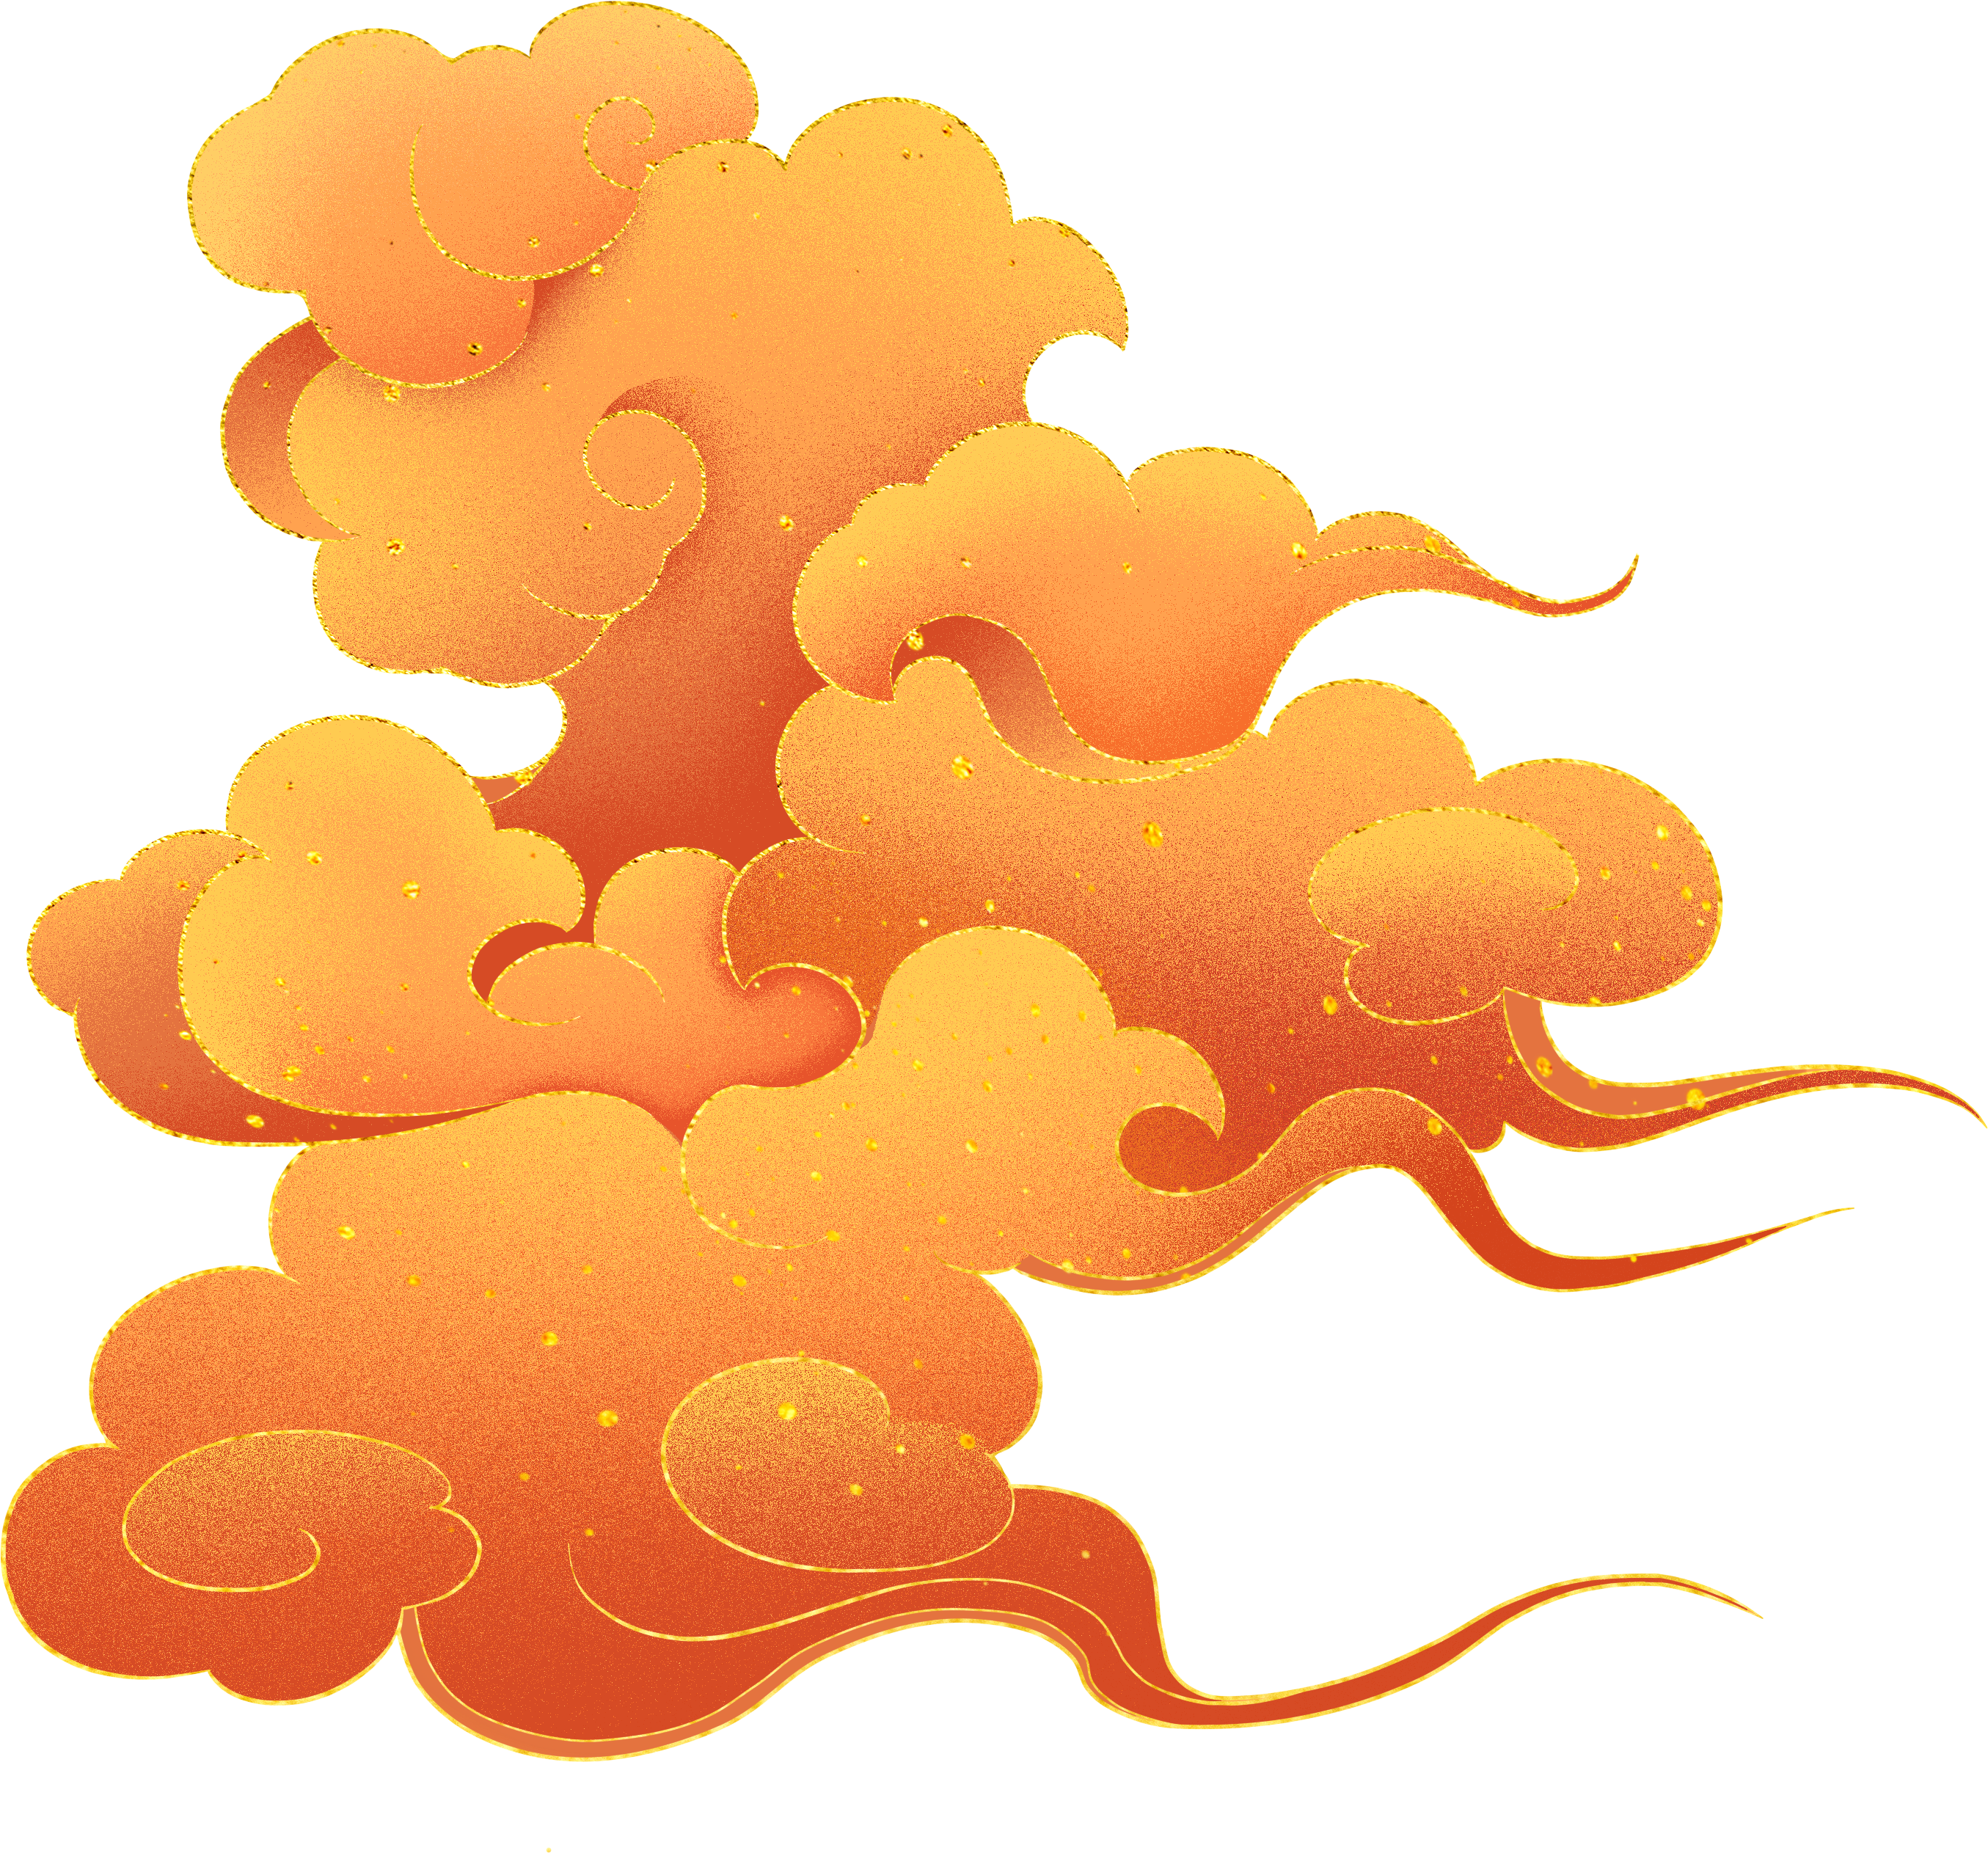 Chinese Clouds Illustration